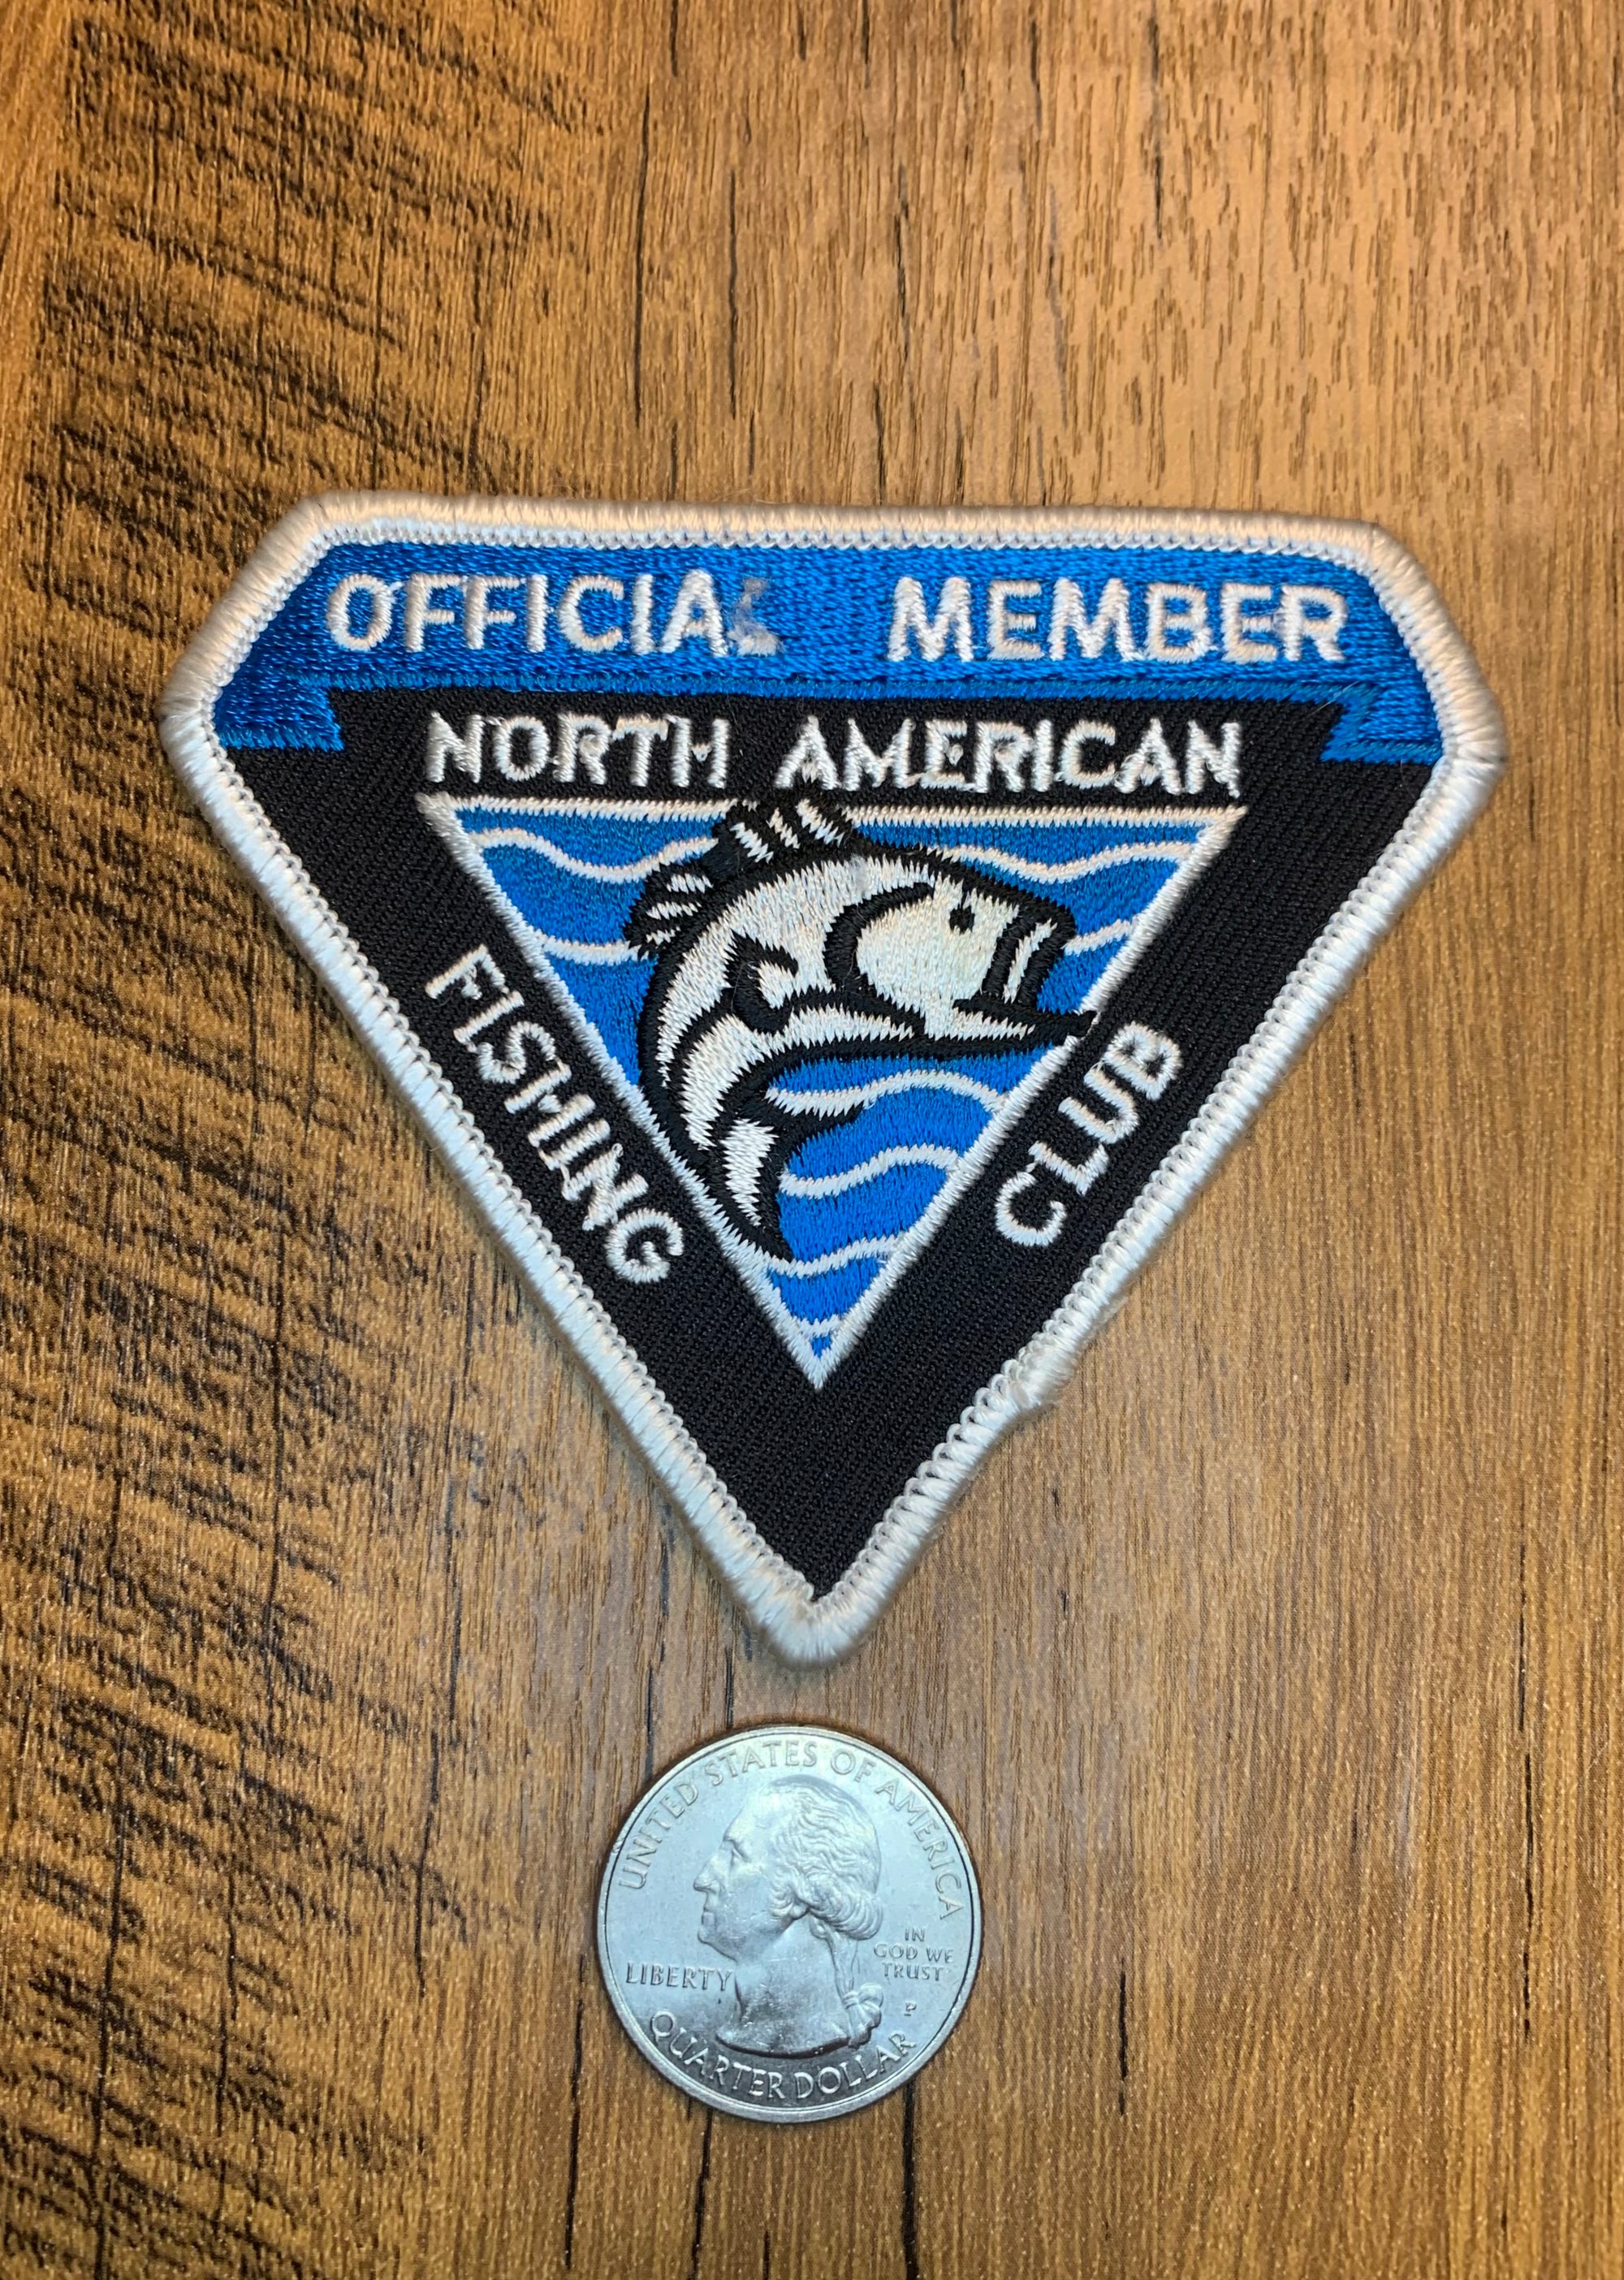 Vintage Official Member North American Fishing Club